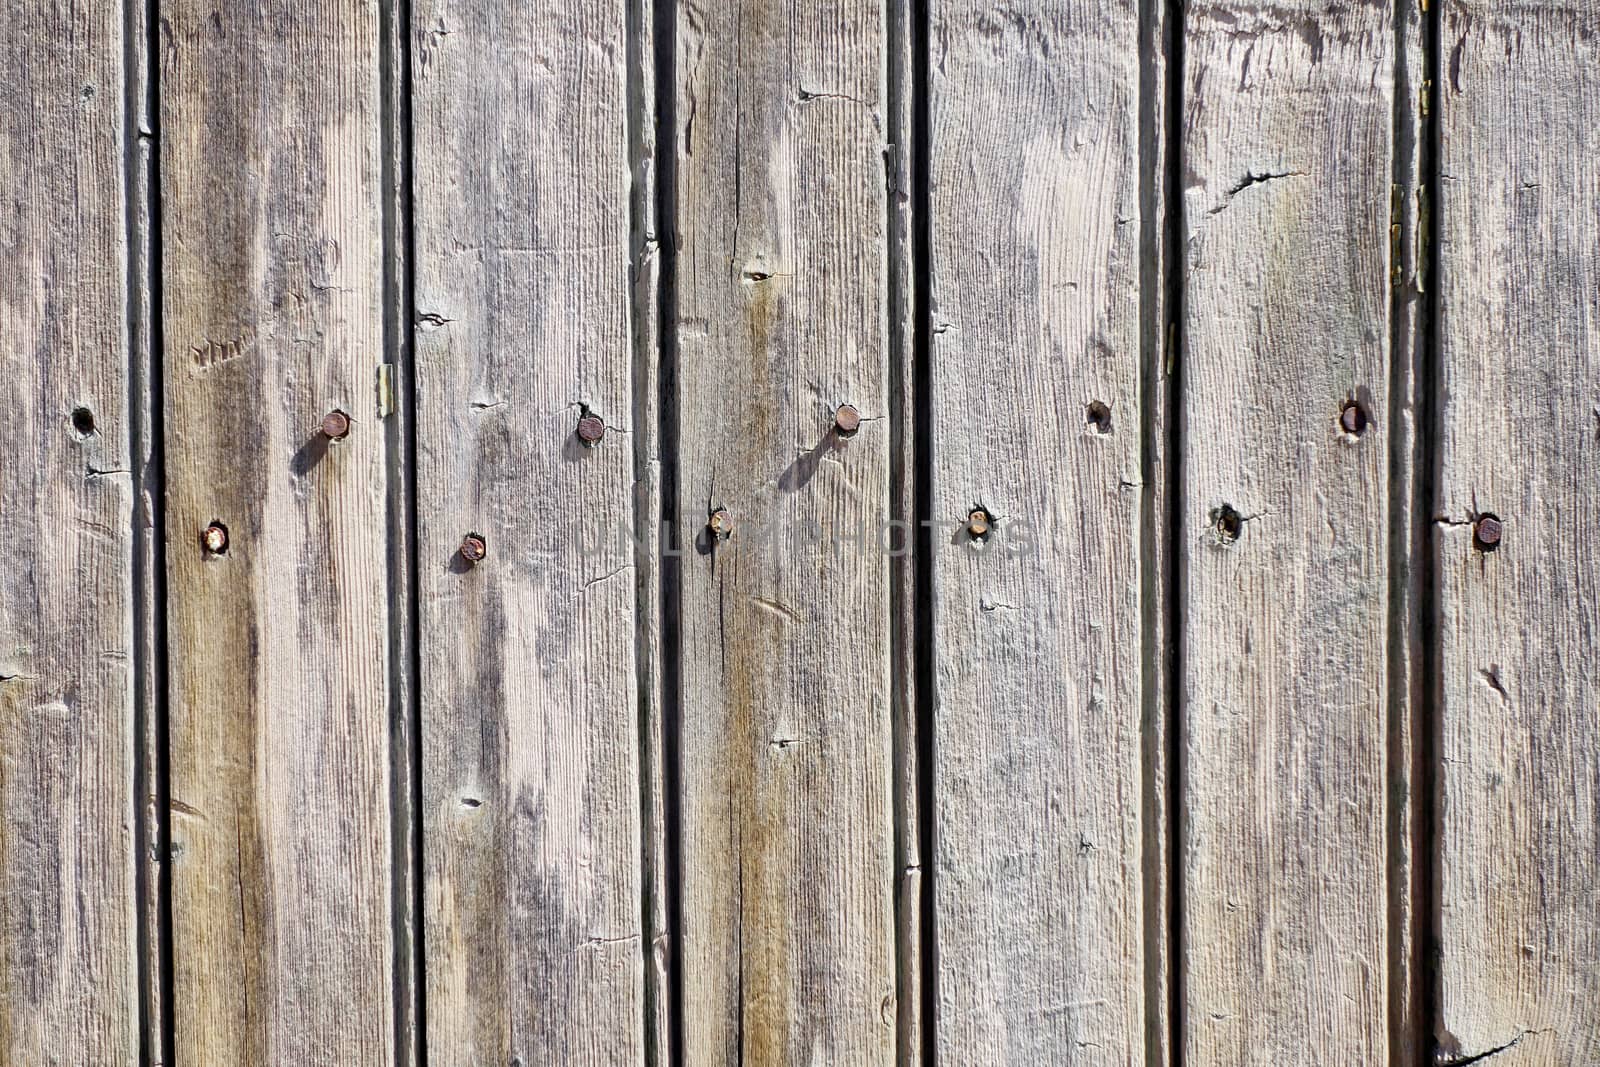 Old rough wood board background texture                               